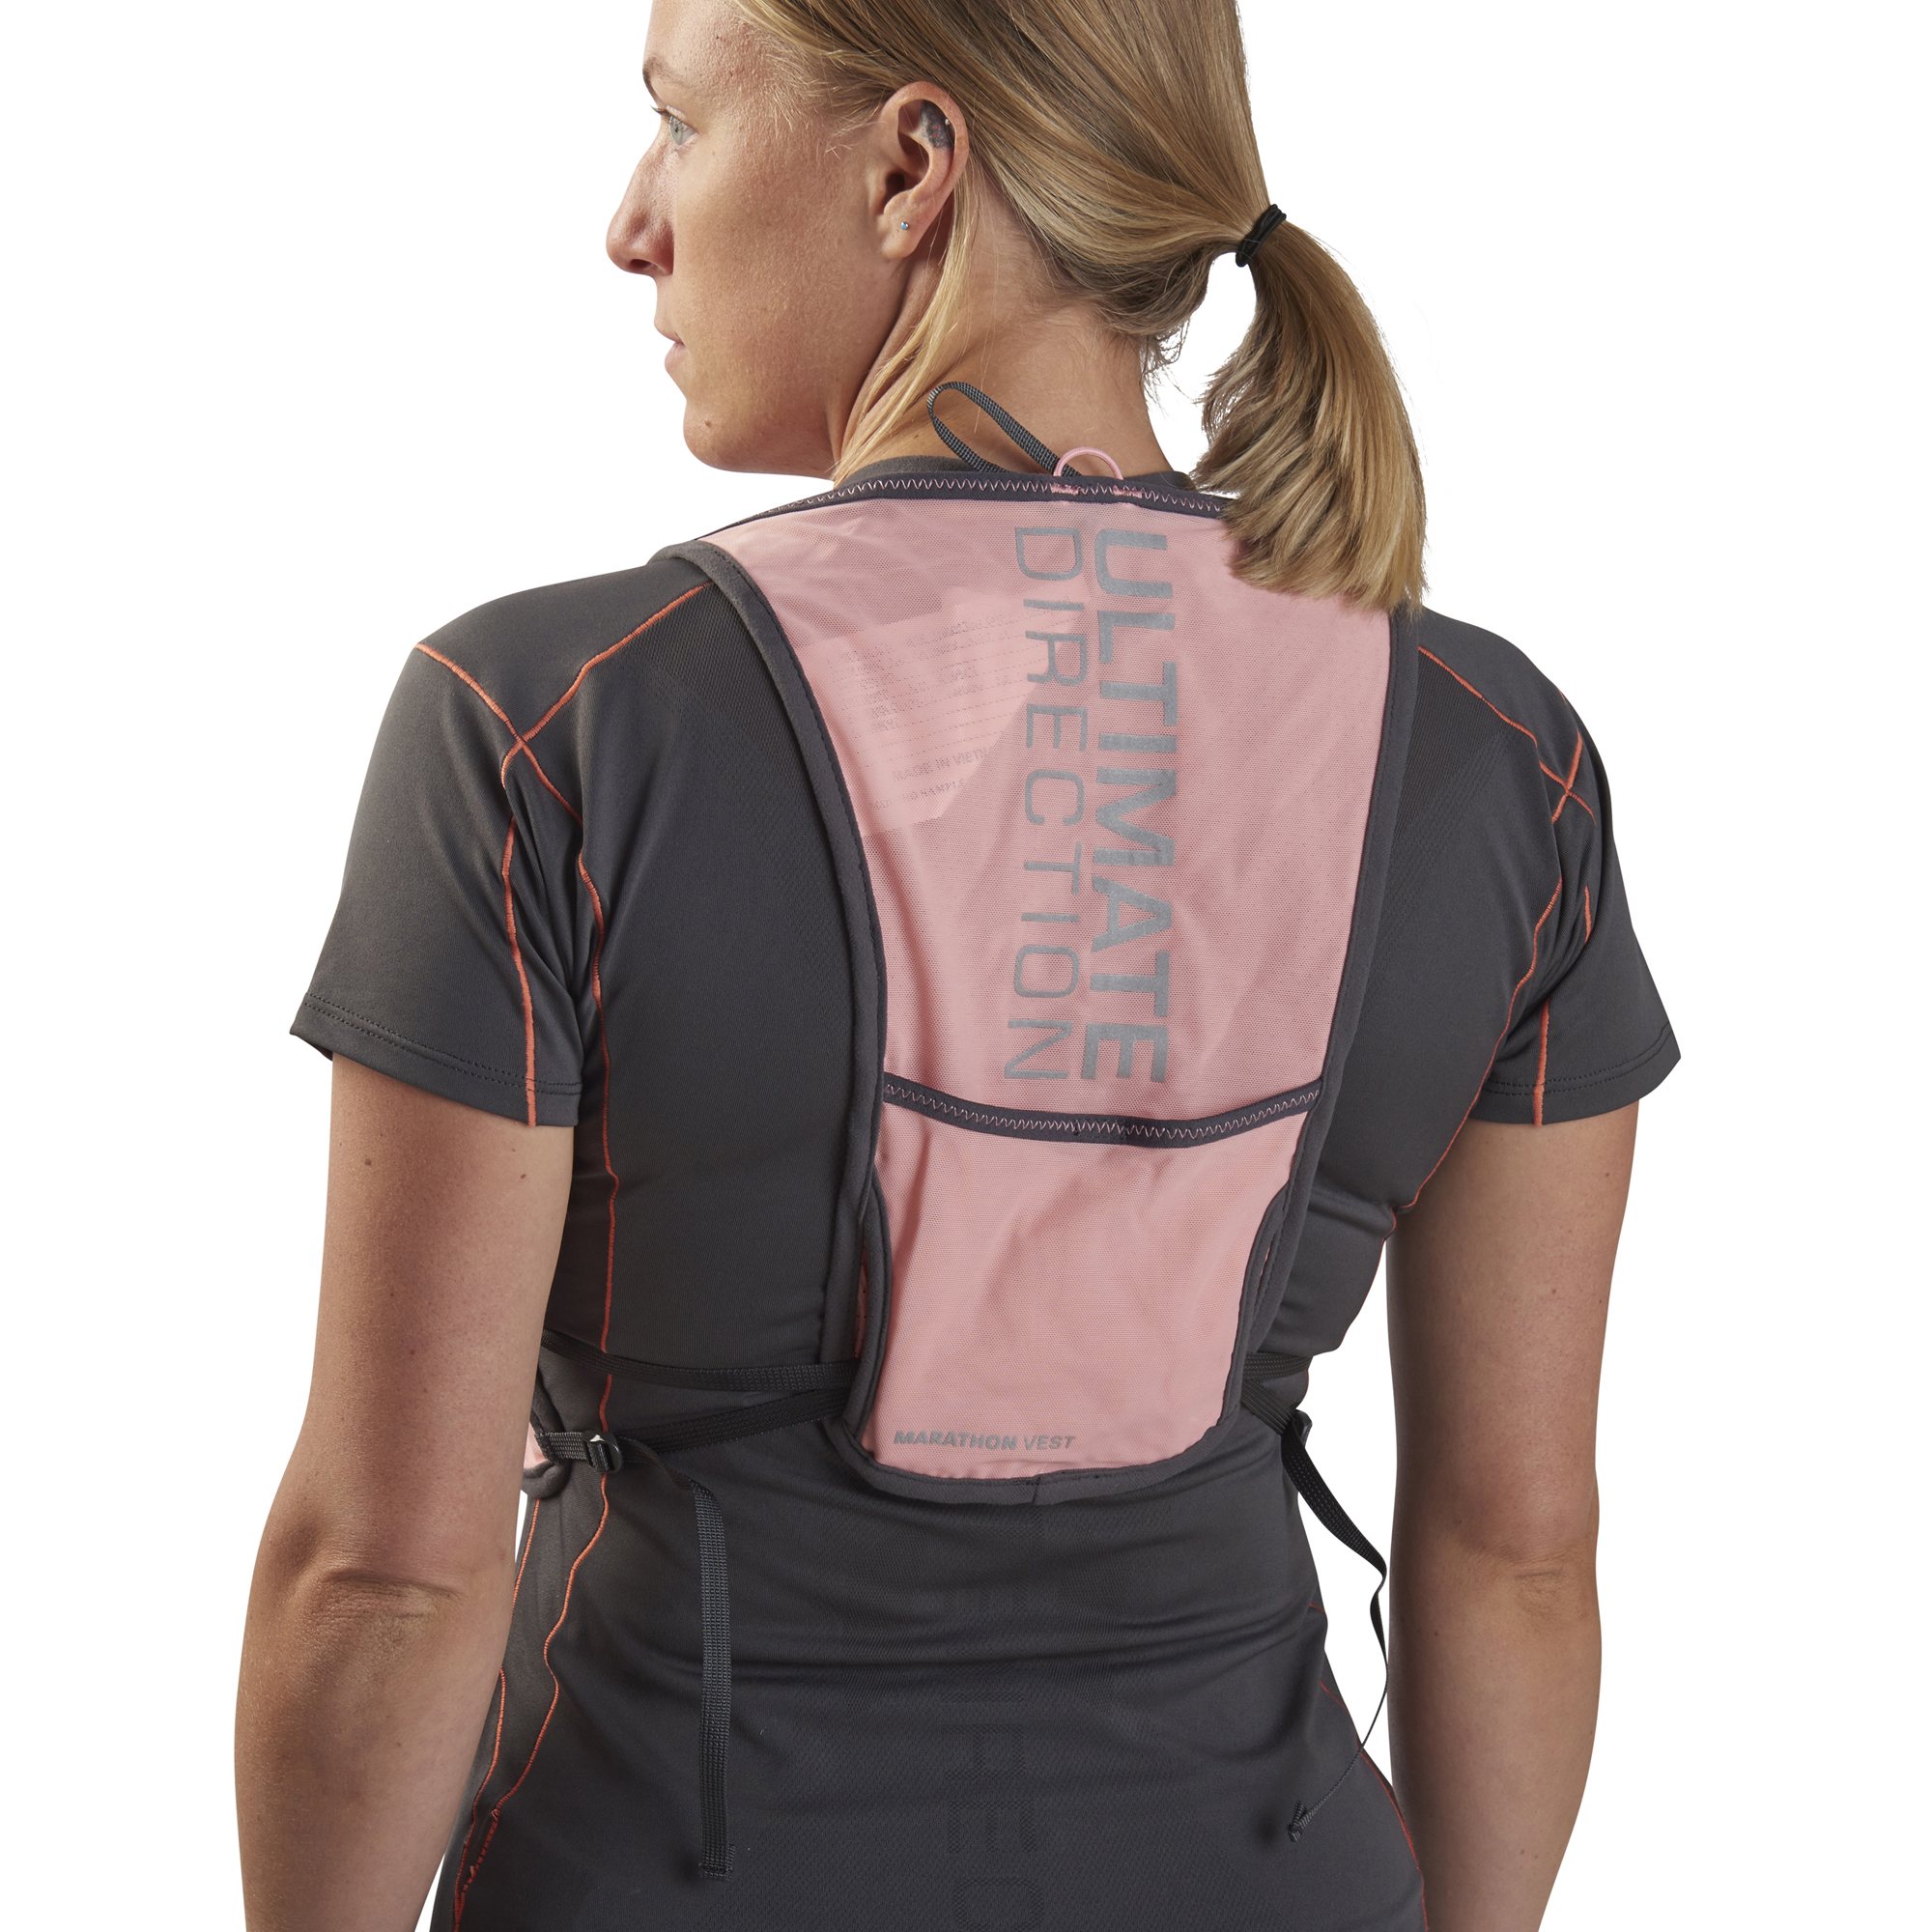 Ultimate Direction Marathon Vest v2 in Millennial Pink Size XS/Small